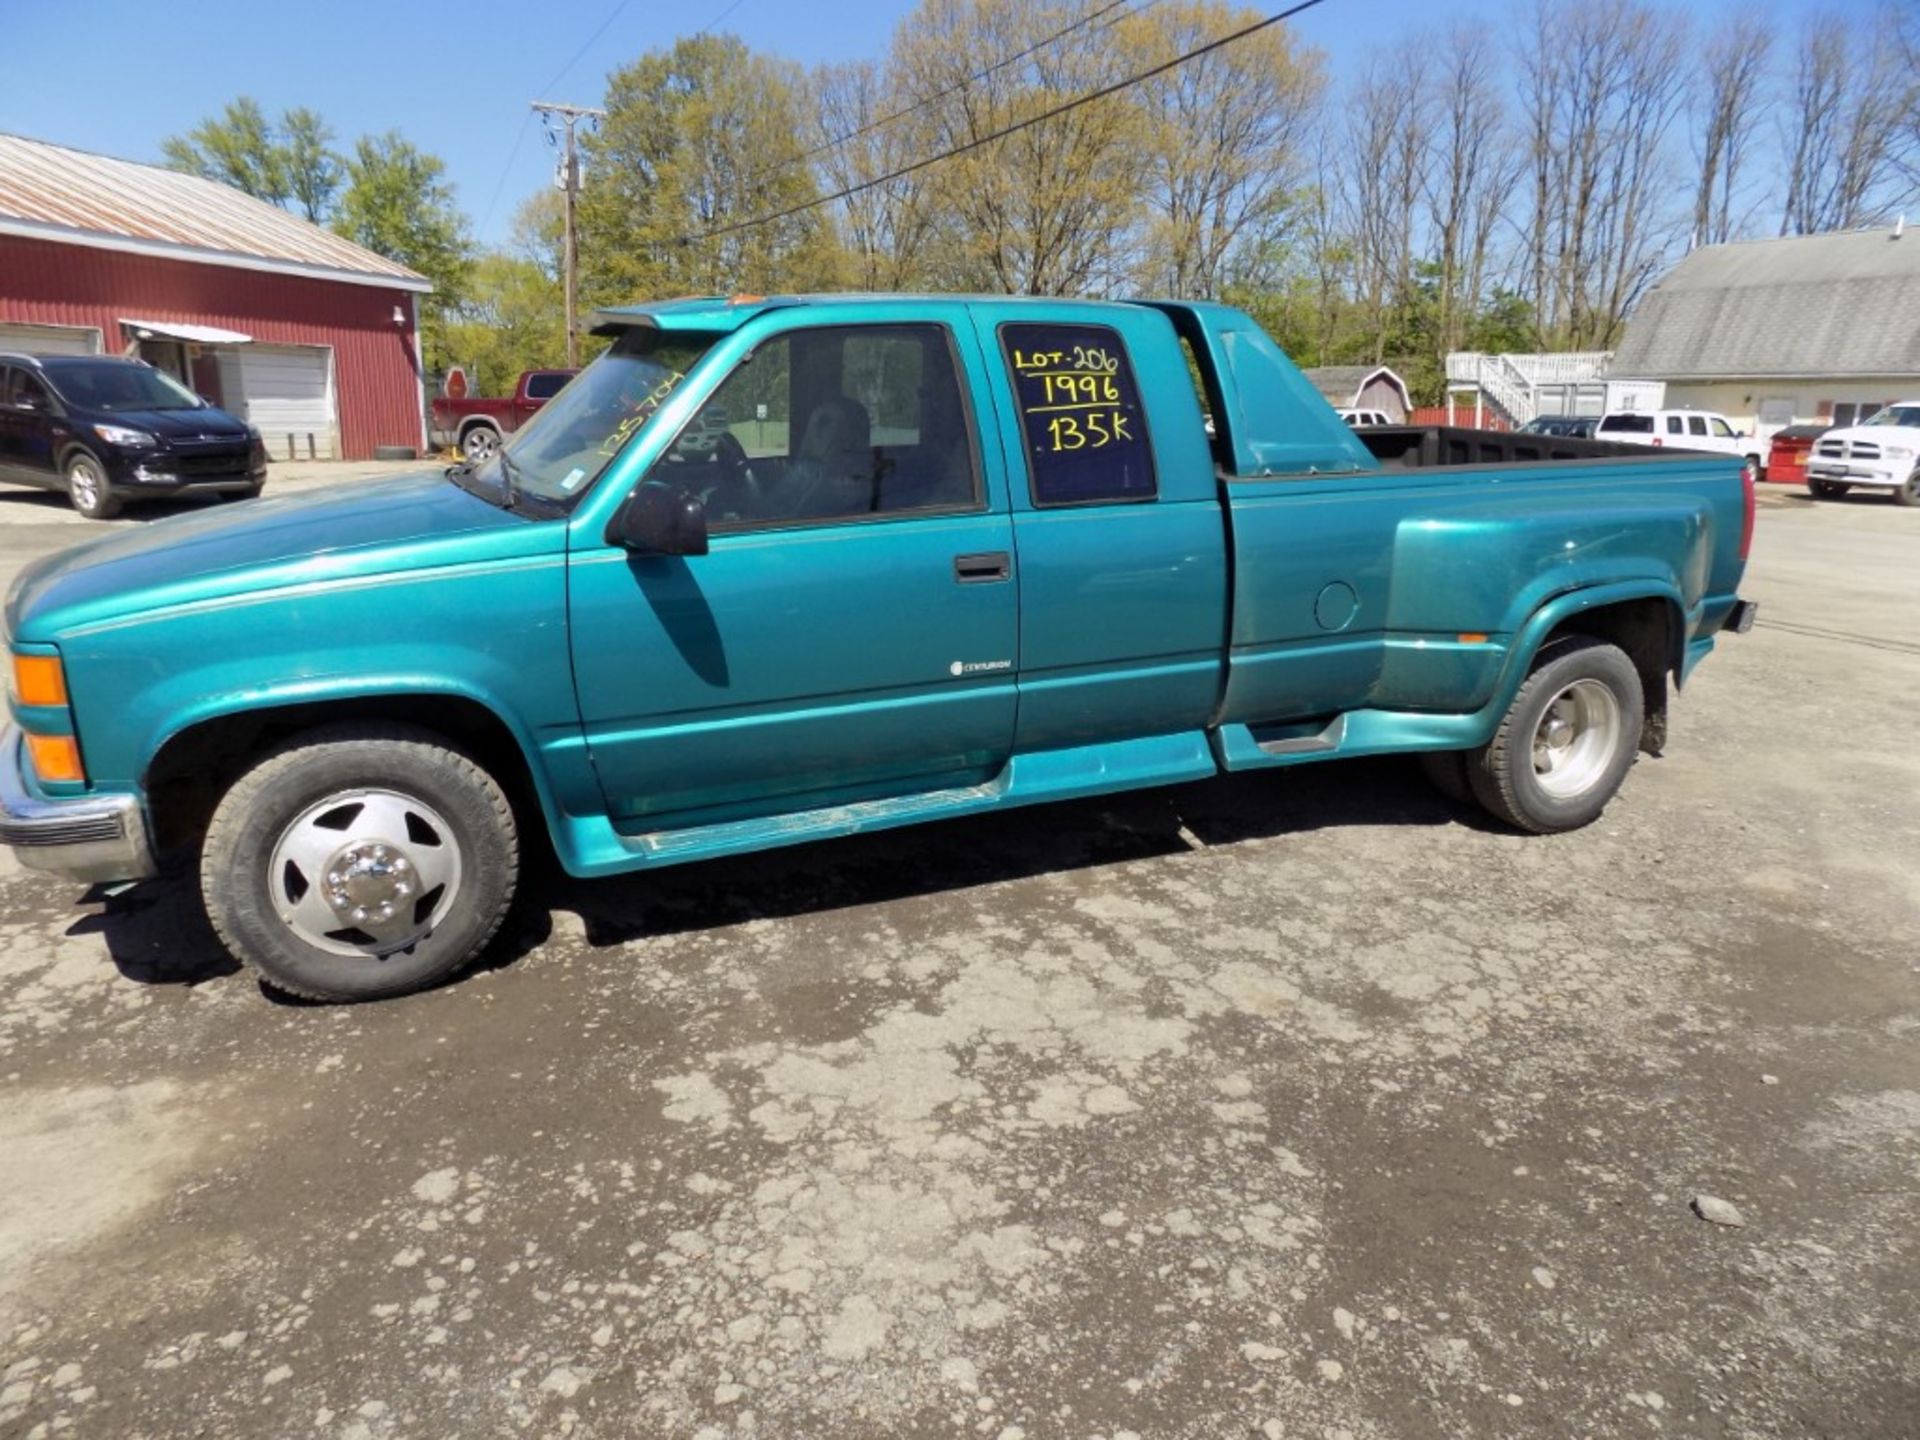 1996 Chevrolet Silverado 3500 Ext. Cab, 2 WD Diesel, Centurion Conversion Package with Leather, - Image 2 of 5